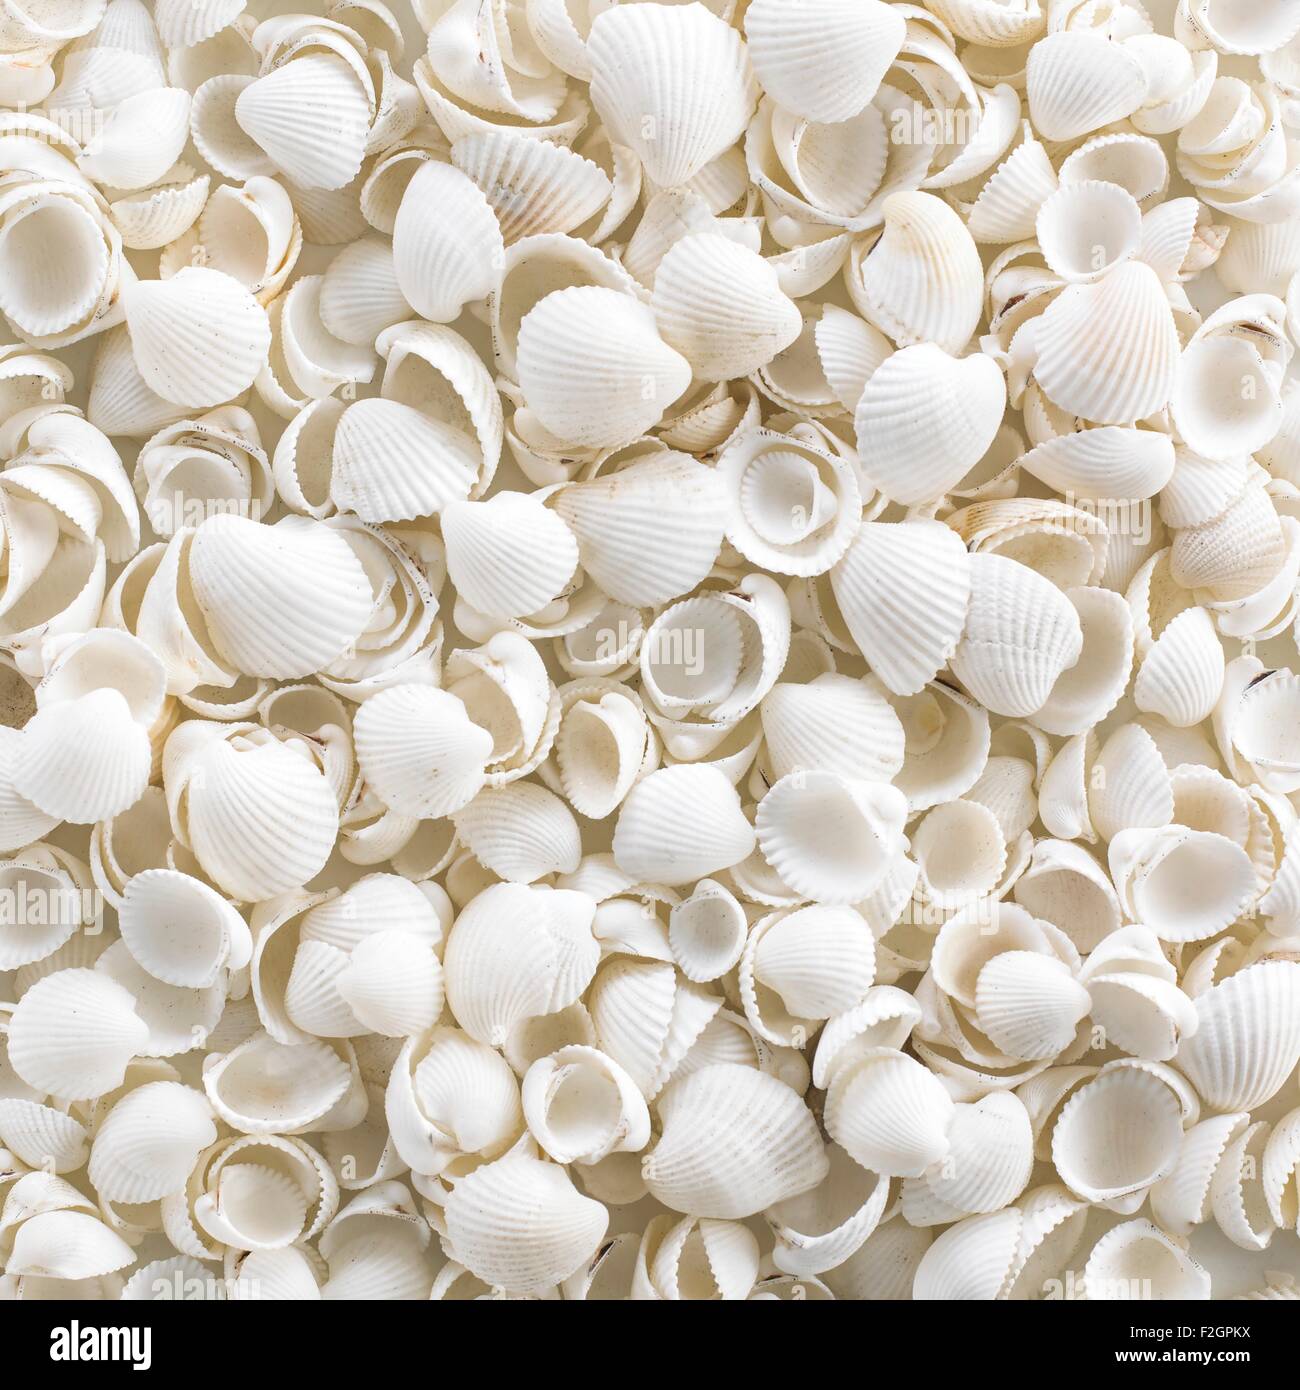 Cockle shells, full frame Stock Photo